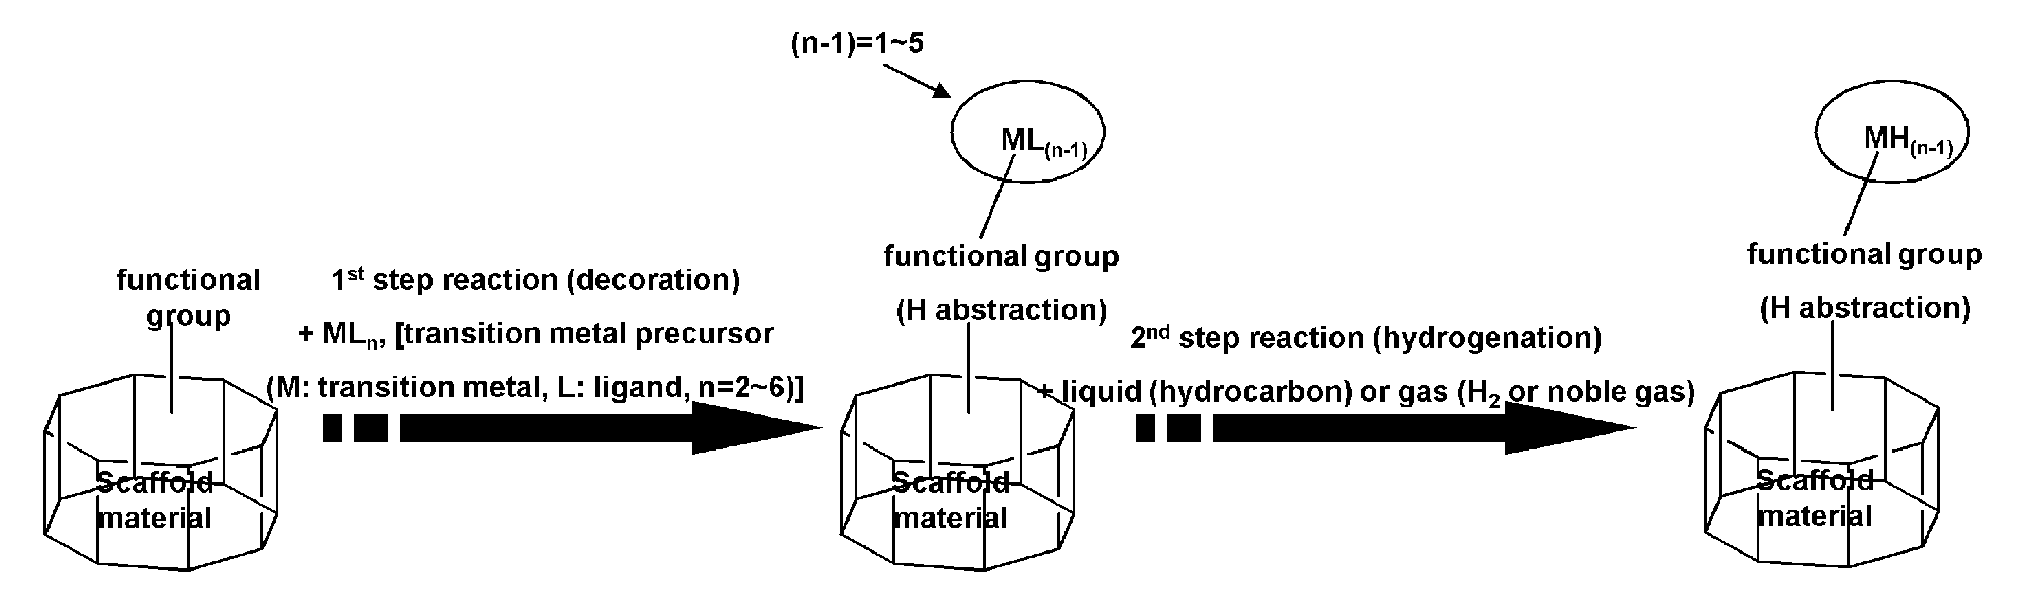 Scaffold Materials-Transition Metal Hydride Complexes, Intermediates Therefor and Method for Preparing the Same